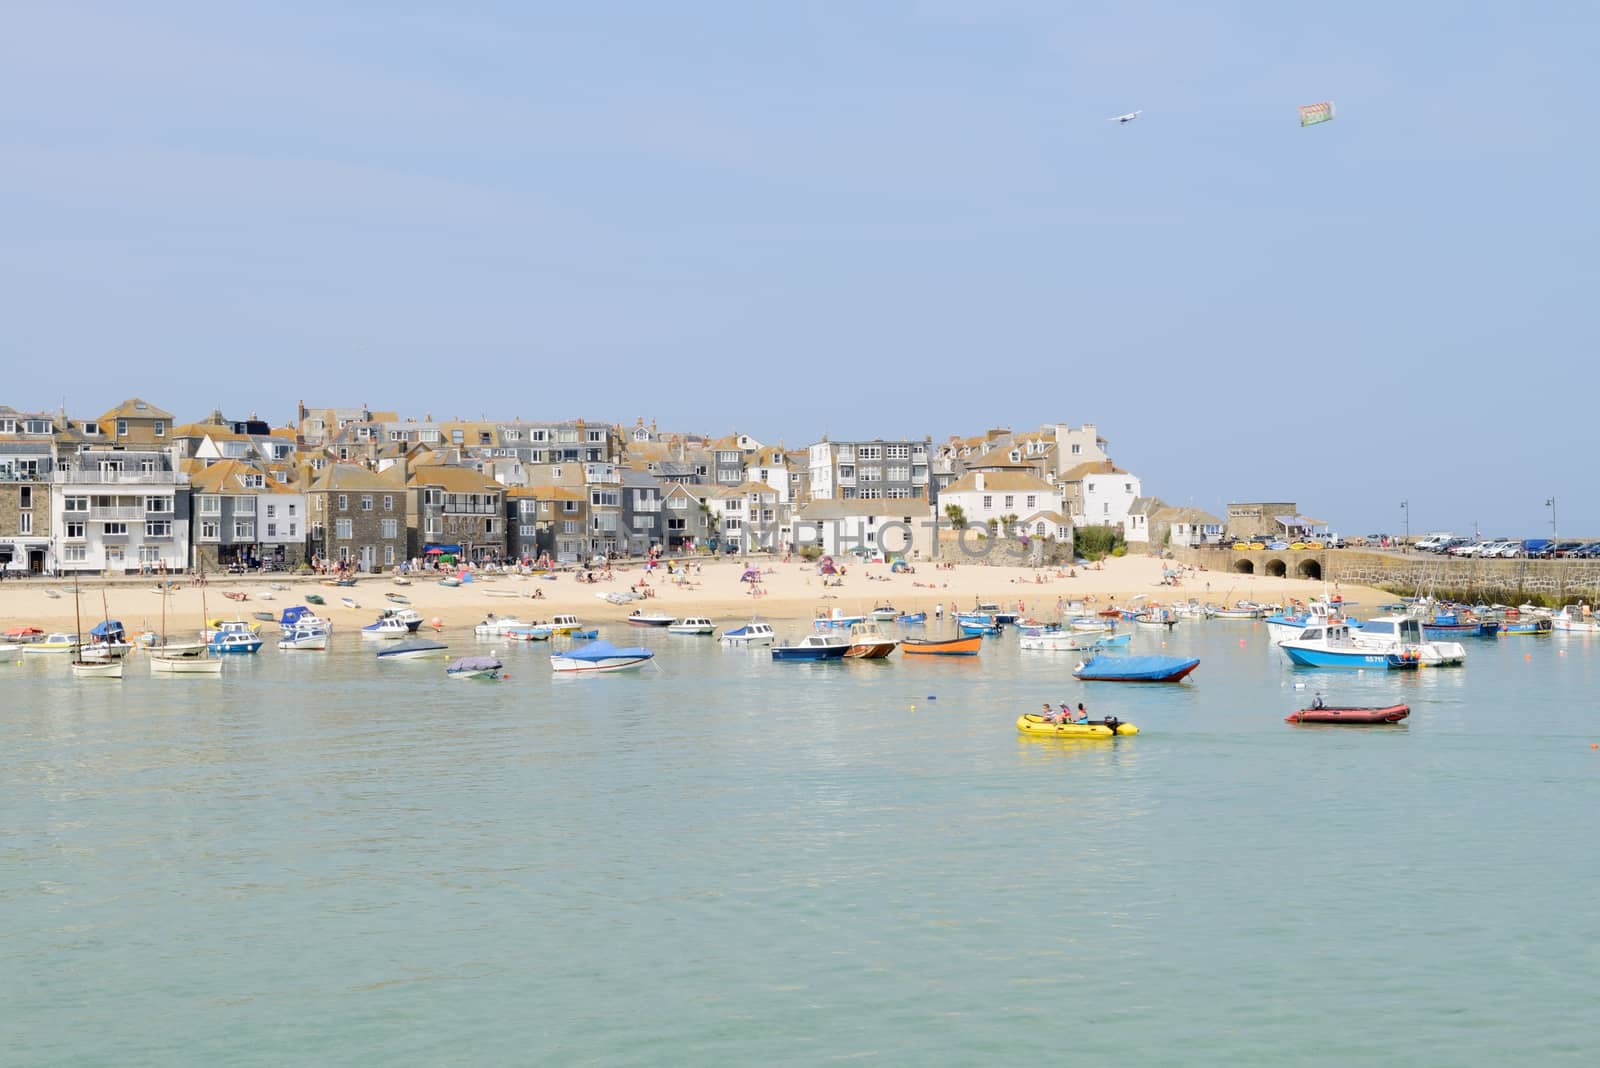 Cornish fishing boats in St Ives, Cornwall, England on a sunny day in the summer.